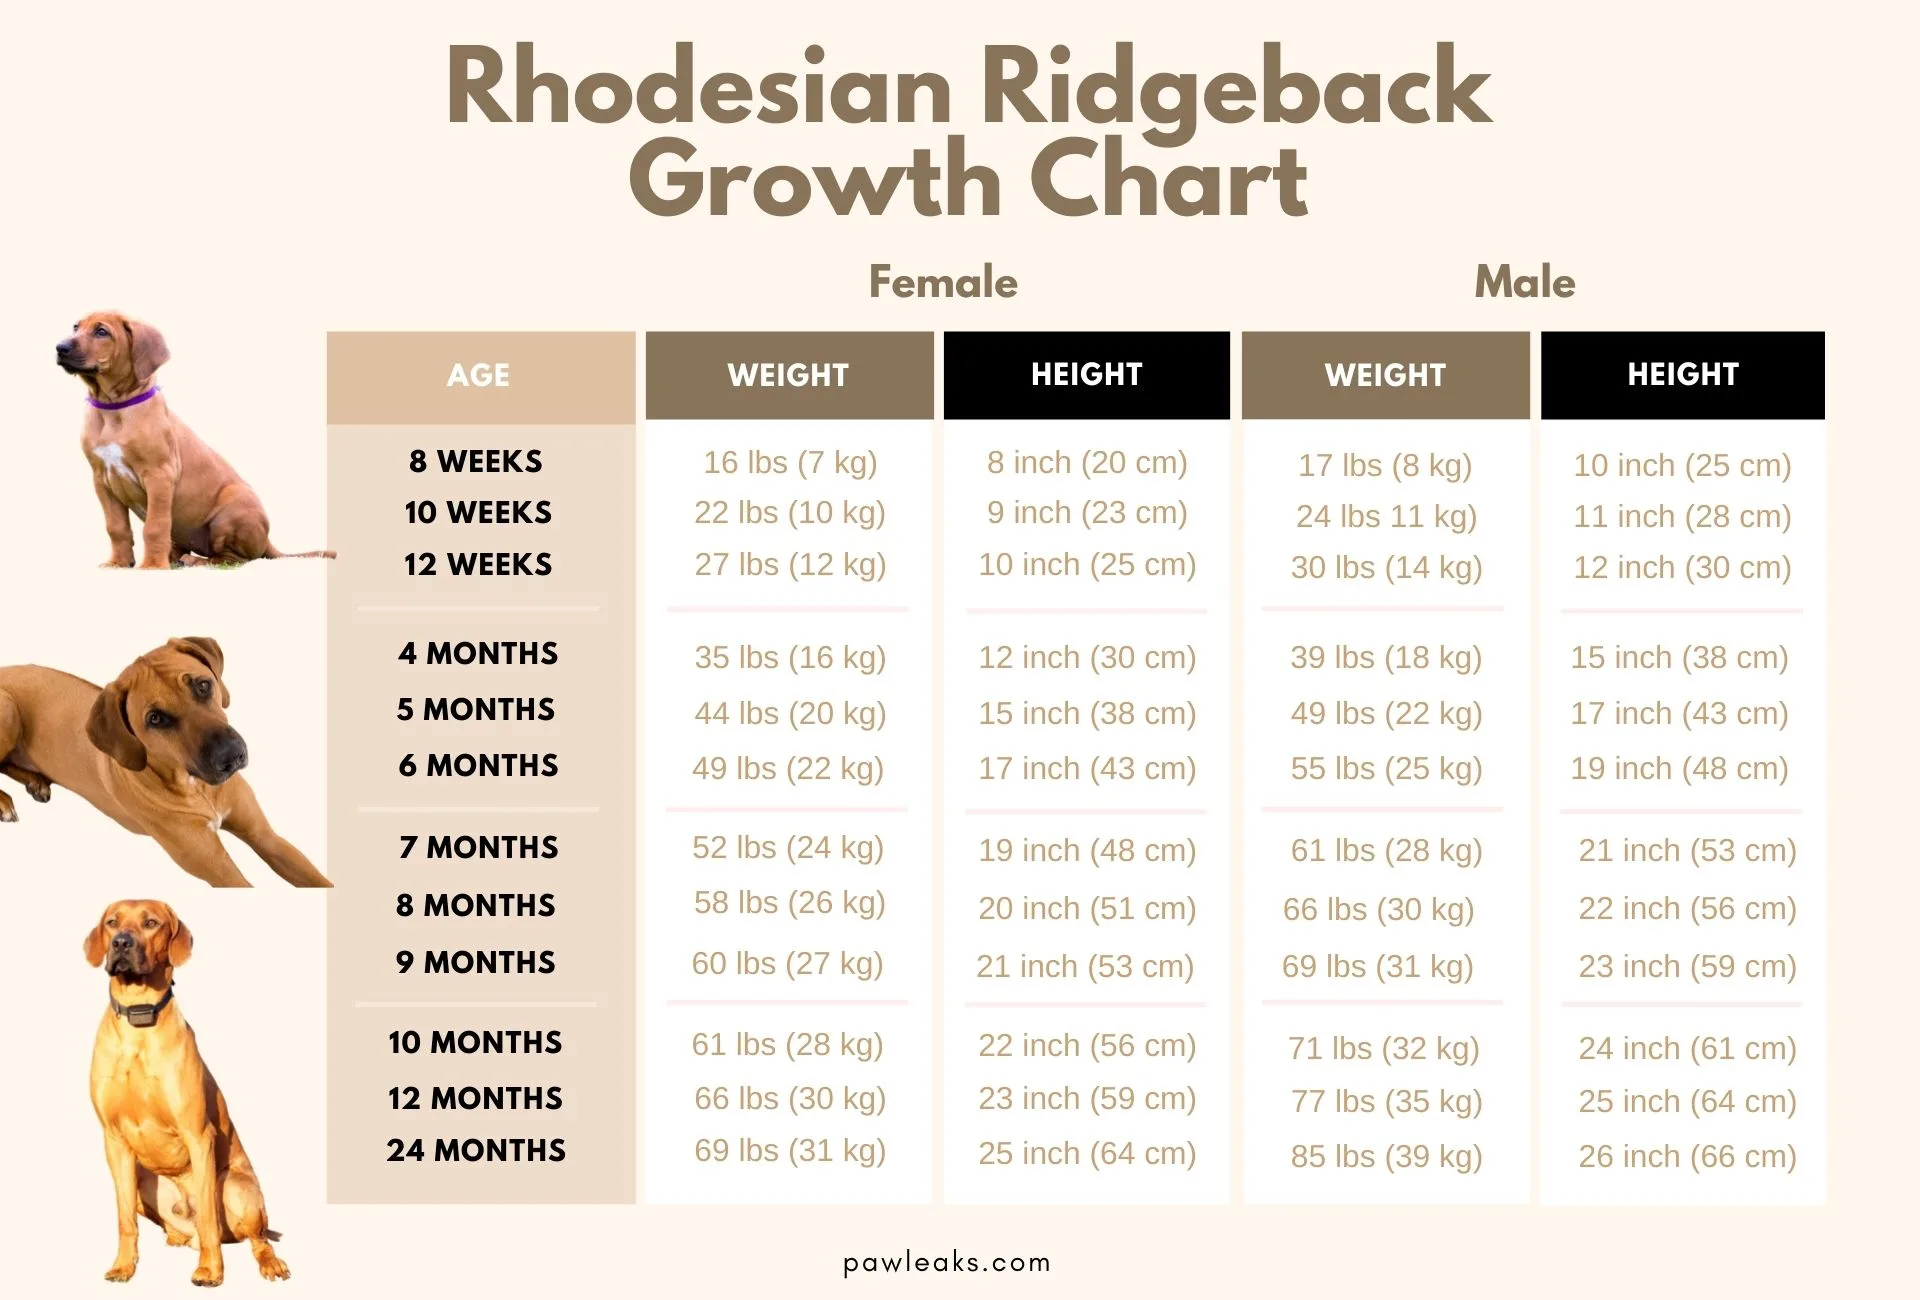 Rhodesian Ridgeback growth chart starting at 8 weeks up until 24 months, sorted by male and female with the appropriate sizes and weights.